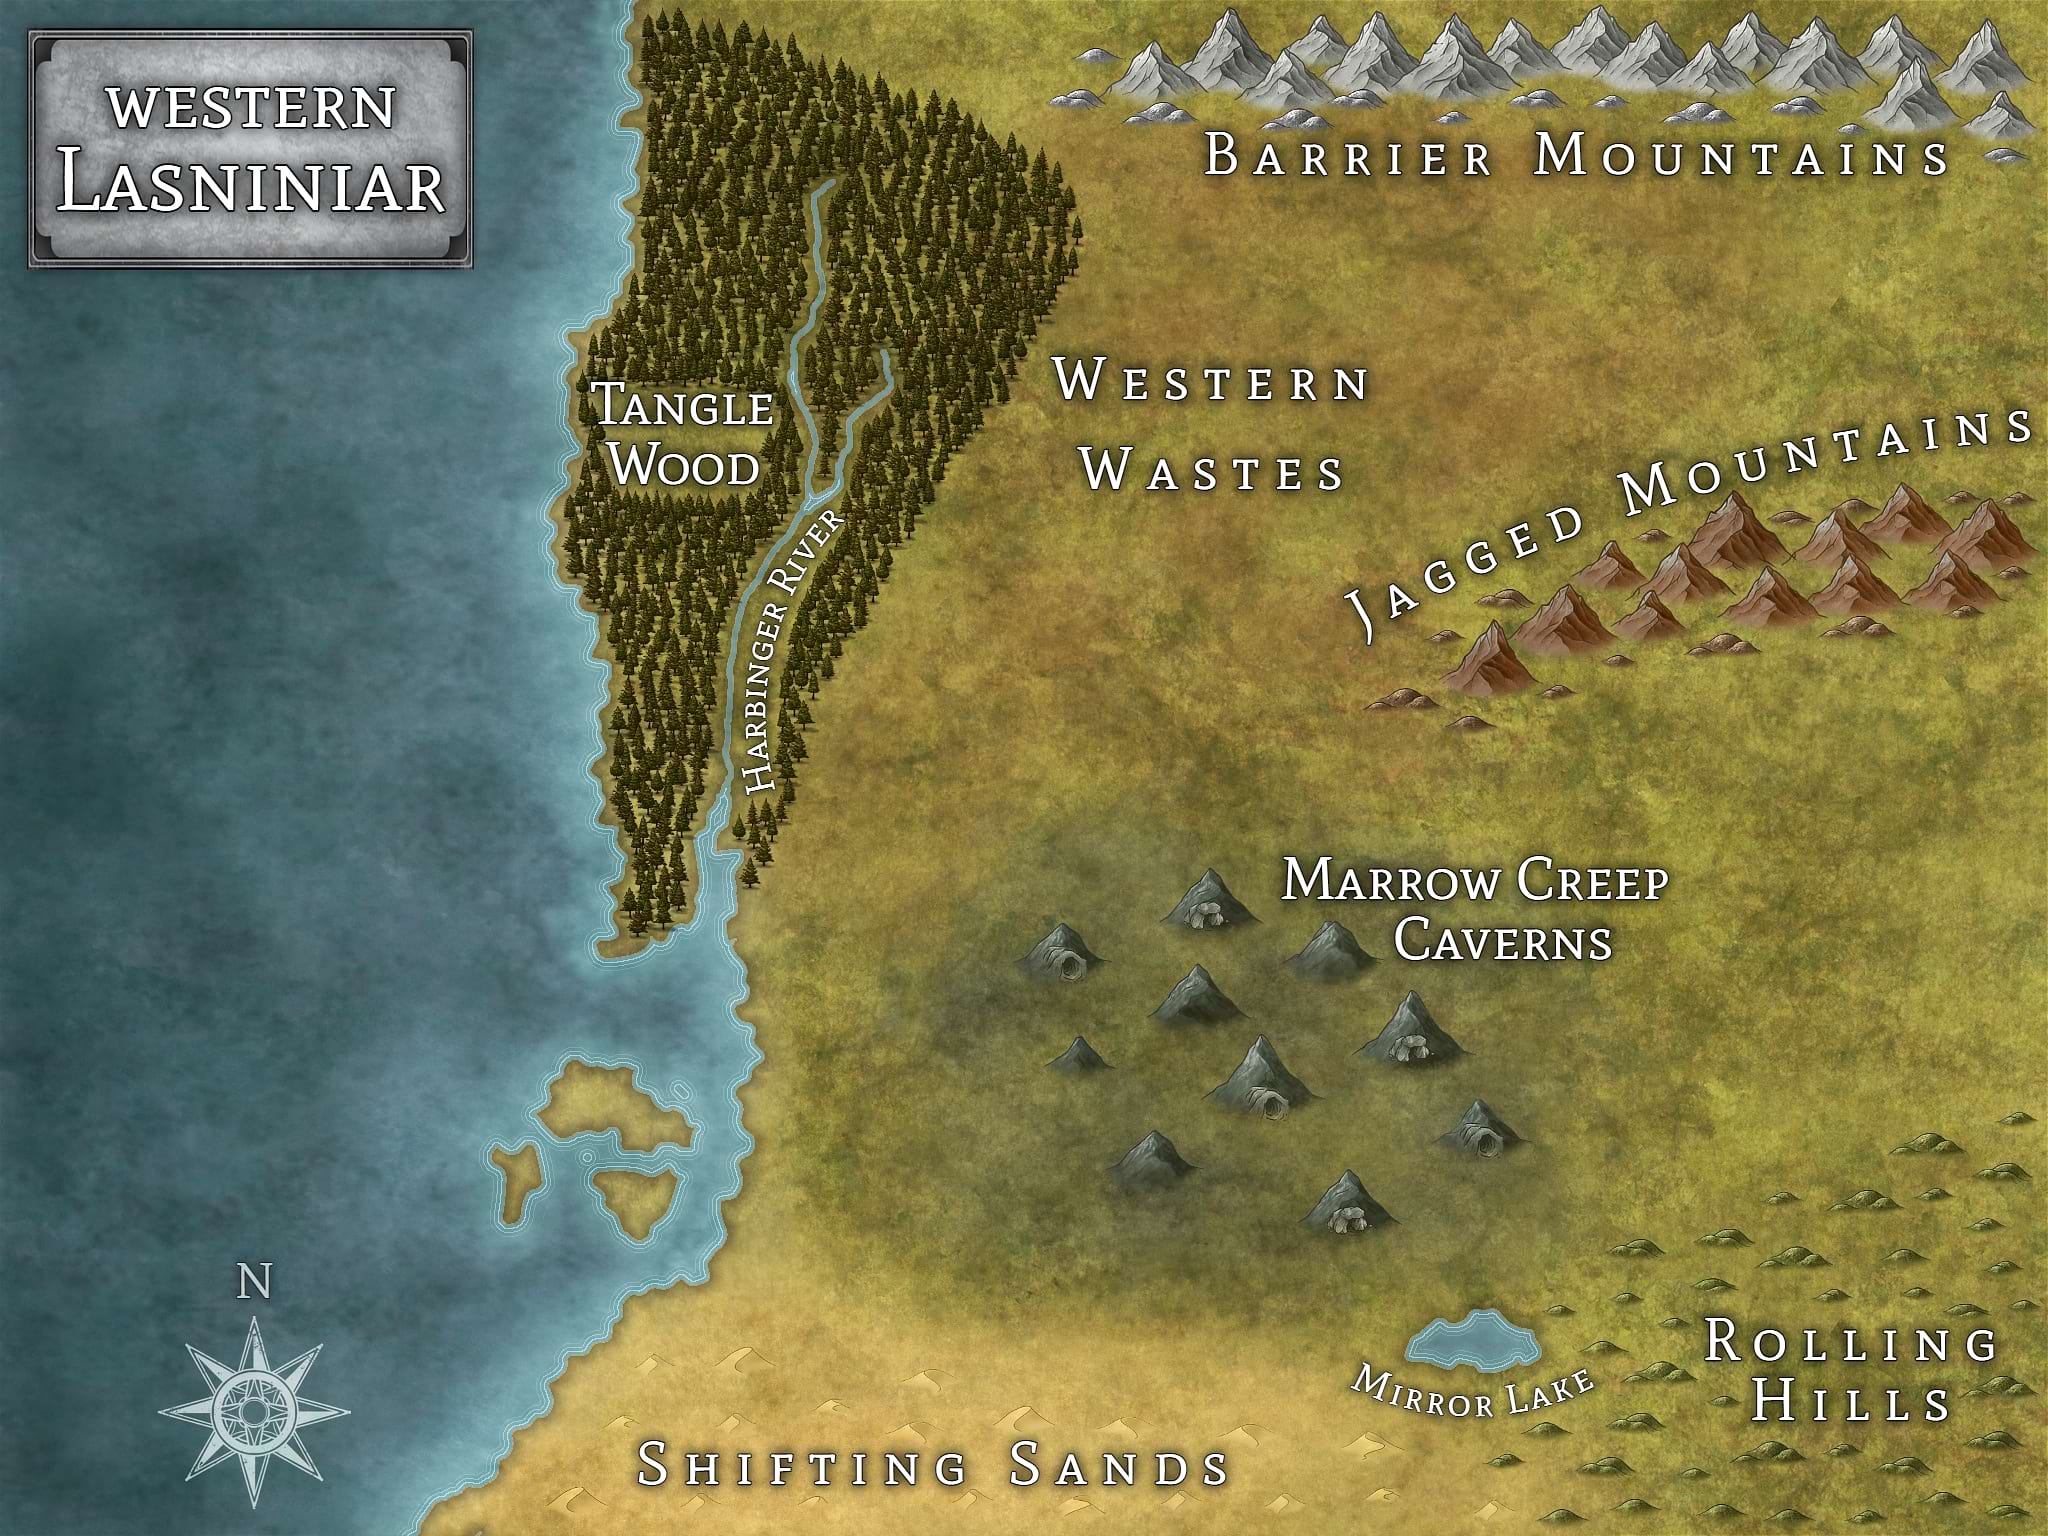 Map of Western Lasniniar from the World of Lasniniar epic fantasy series